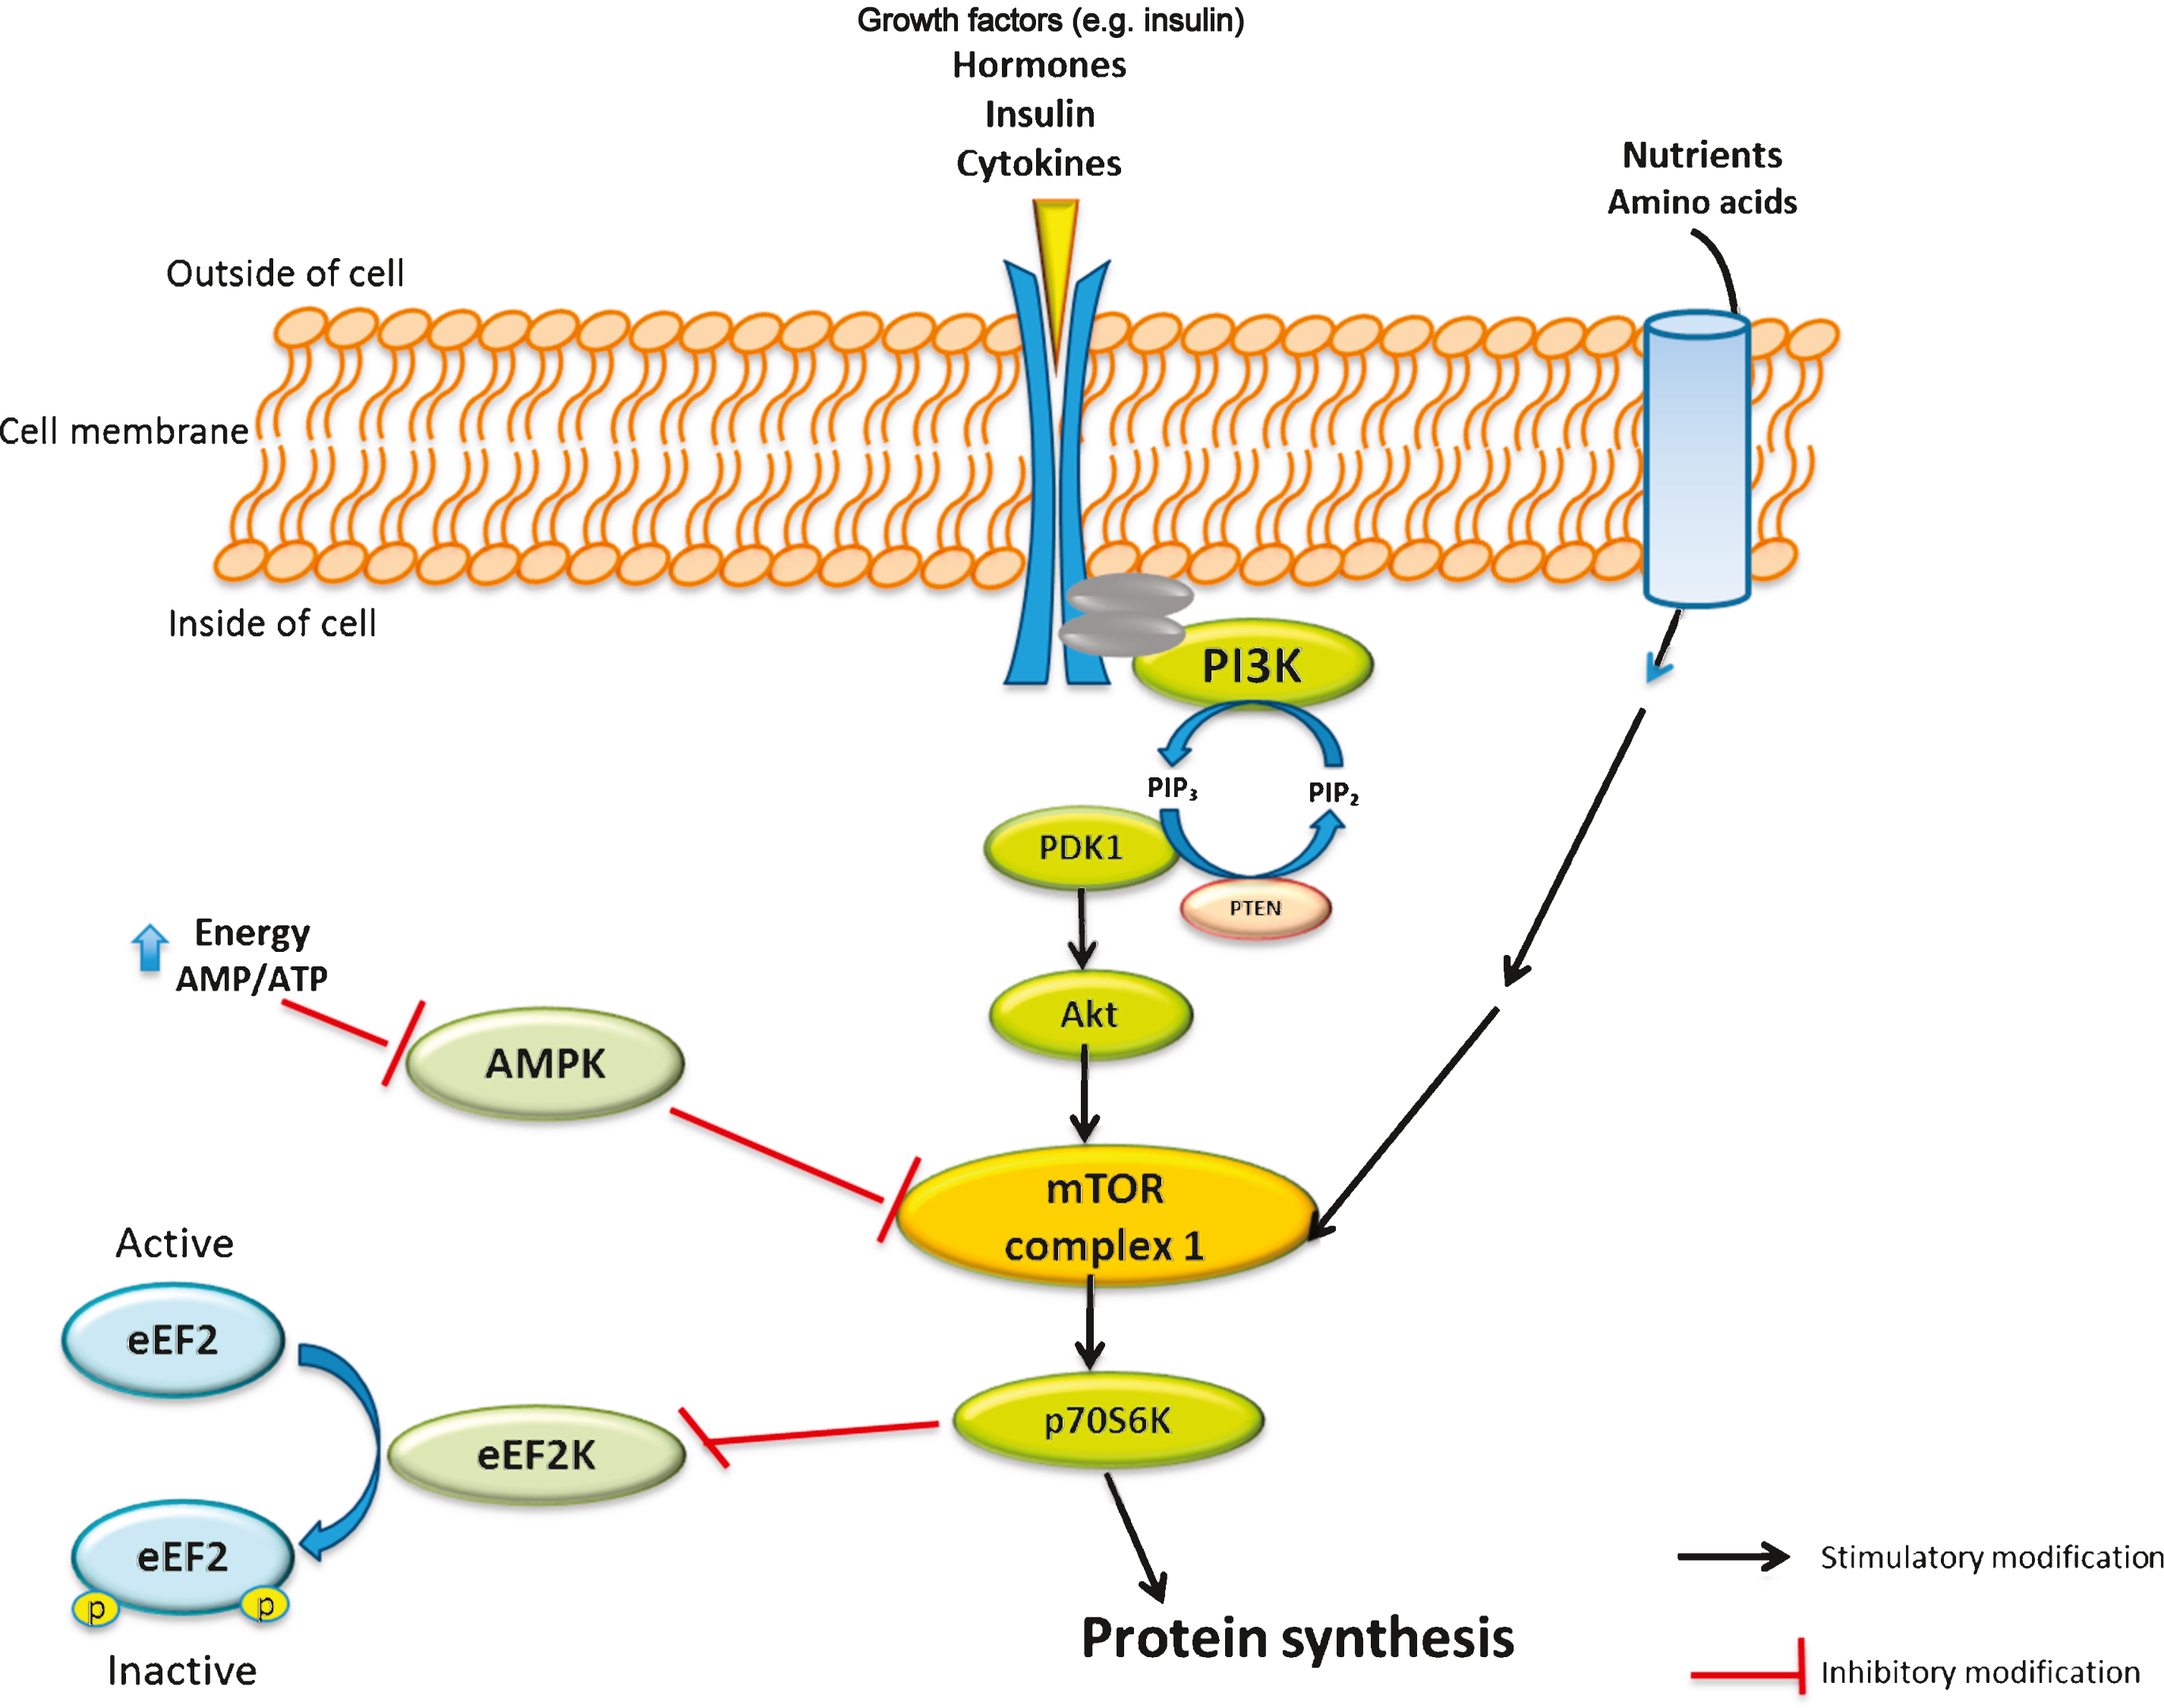 Simplified view of mammalian target of rapamycin (mTOR) signalling pathway and role of amino acids and leucine in skeletal muscles protein synthesis. mTOR is a conserved serine/threonine kinase involved in many signal transduction pathways within the body, regulating cell growth and homeostasis. The mTOR pathway is activated by insulin, growth factors and amino acids. Activation of mTOR results in the phosphorylation of specific proteins that ultimately phosphorylate and activate p70 ribosomal S6 protein kinase (p70S6K), which triggers a cascade of responses that subsequently results in protein biosynthesis. 5’ adenosine monophosphate-activated protein kinase (AMPK) is also a key regulator of cellular energy homeostasis. AMPK can sense the cellular energy level and down-regulate the cellular pathways that consume ATP in case of decreased cell energy content. Eukaryotic elongation factor 2 (eEF2) in its active form results in activation of overall translation elongation in protein synthesis. PIP2 indicates phosphatidylinositol 4,5 bisphosphate; PIP3, phosphatidylinositol (3,4,5)-trisphosphate; PTEN, phosphatidylinositol-3,4,5-trisphosphate 3-phosphatase; PDK1, 3-phosphoinositide dependent protein kinase-1; eEF2K, eukaryotic elongation factor 2 kinase; p, phosphate; AMP, adenosine monophosphate; ATP, adenosine triphosphate.